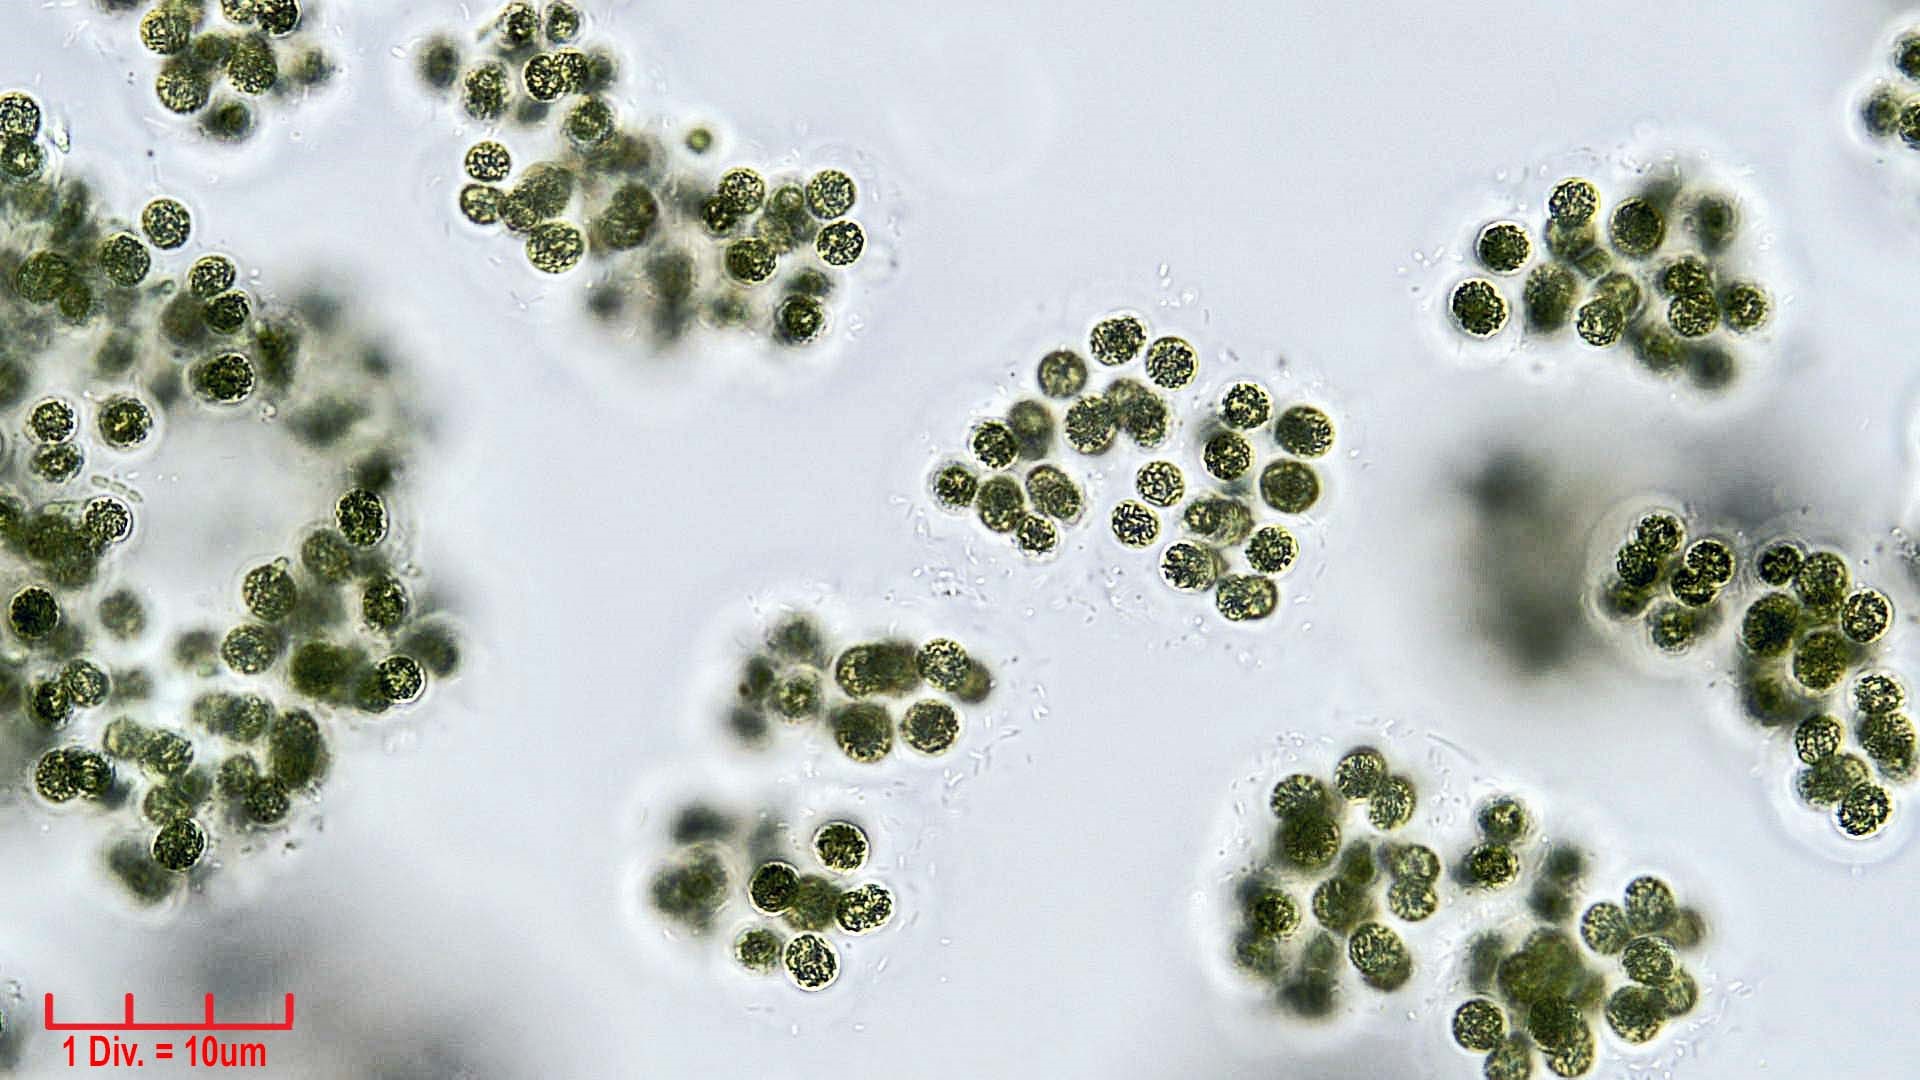 Cyanobacteria/Chroococcales/Microcystaceae/Microcystis/viridis/microcystis-viridis-67.jpg